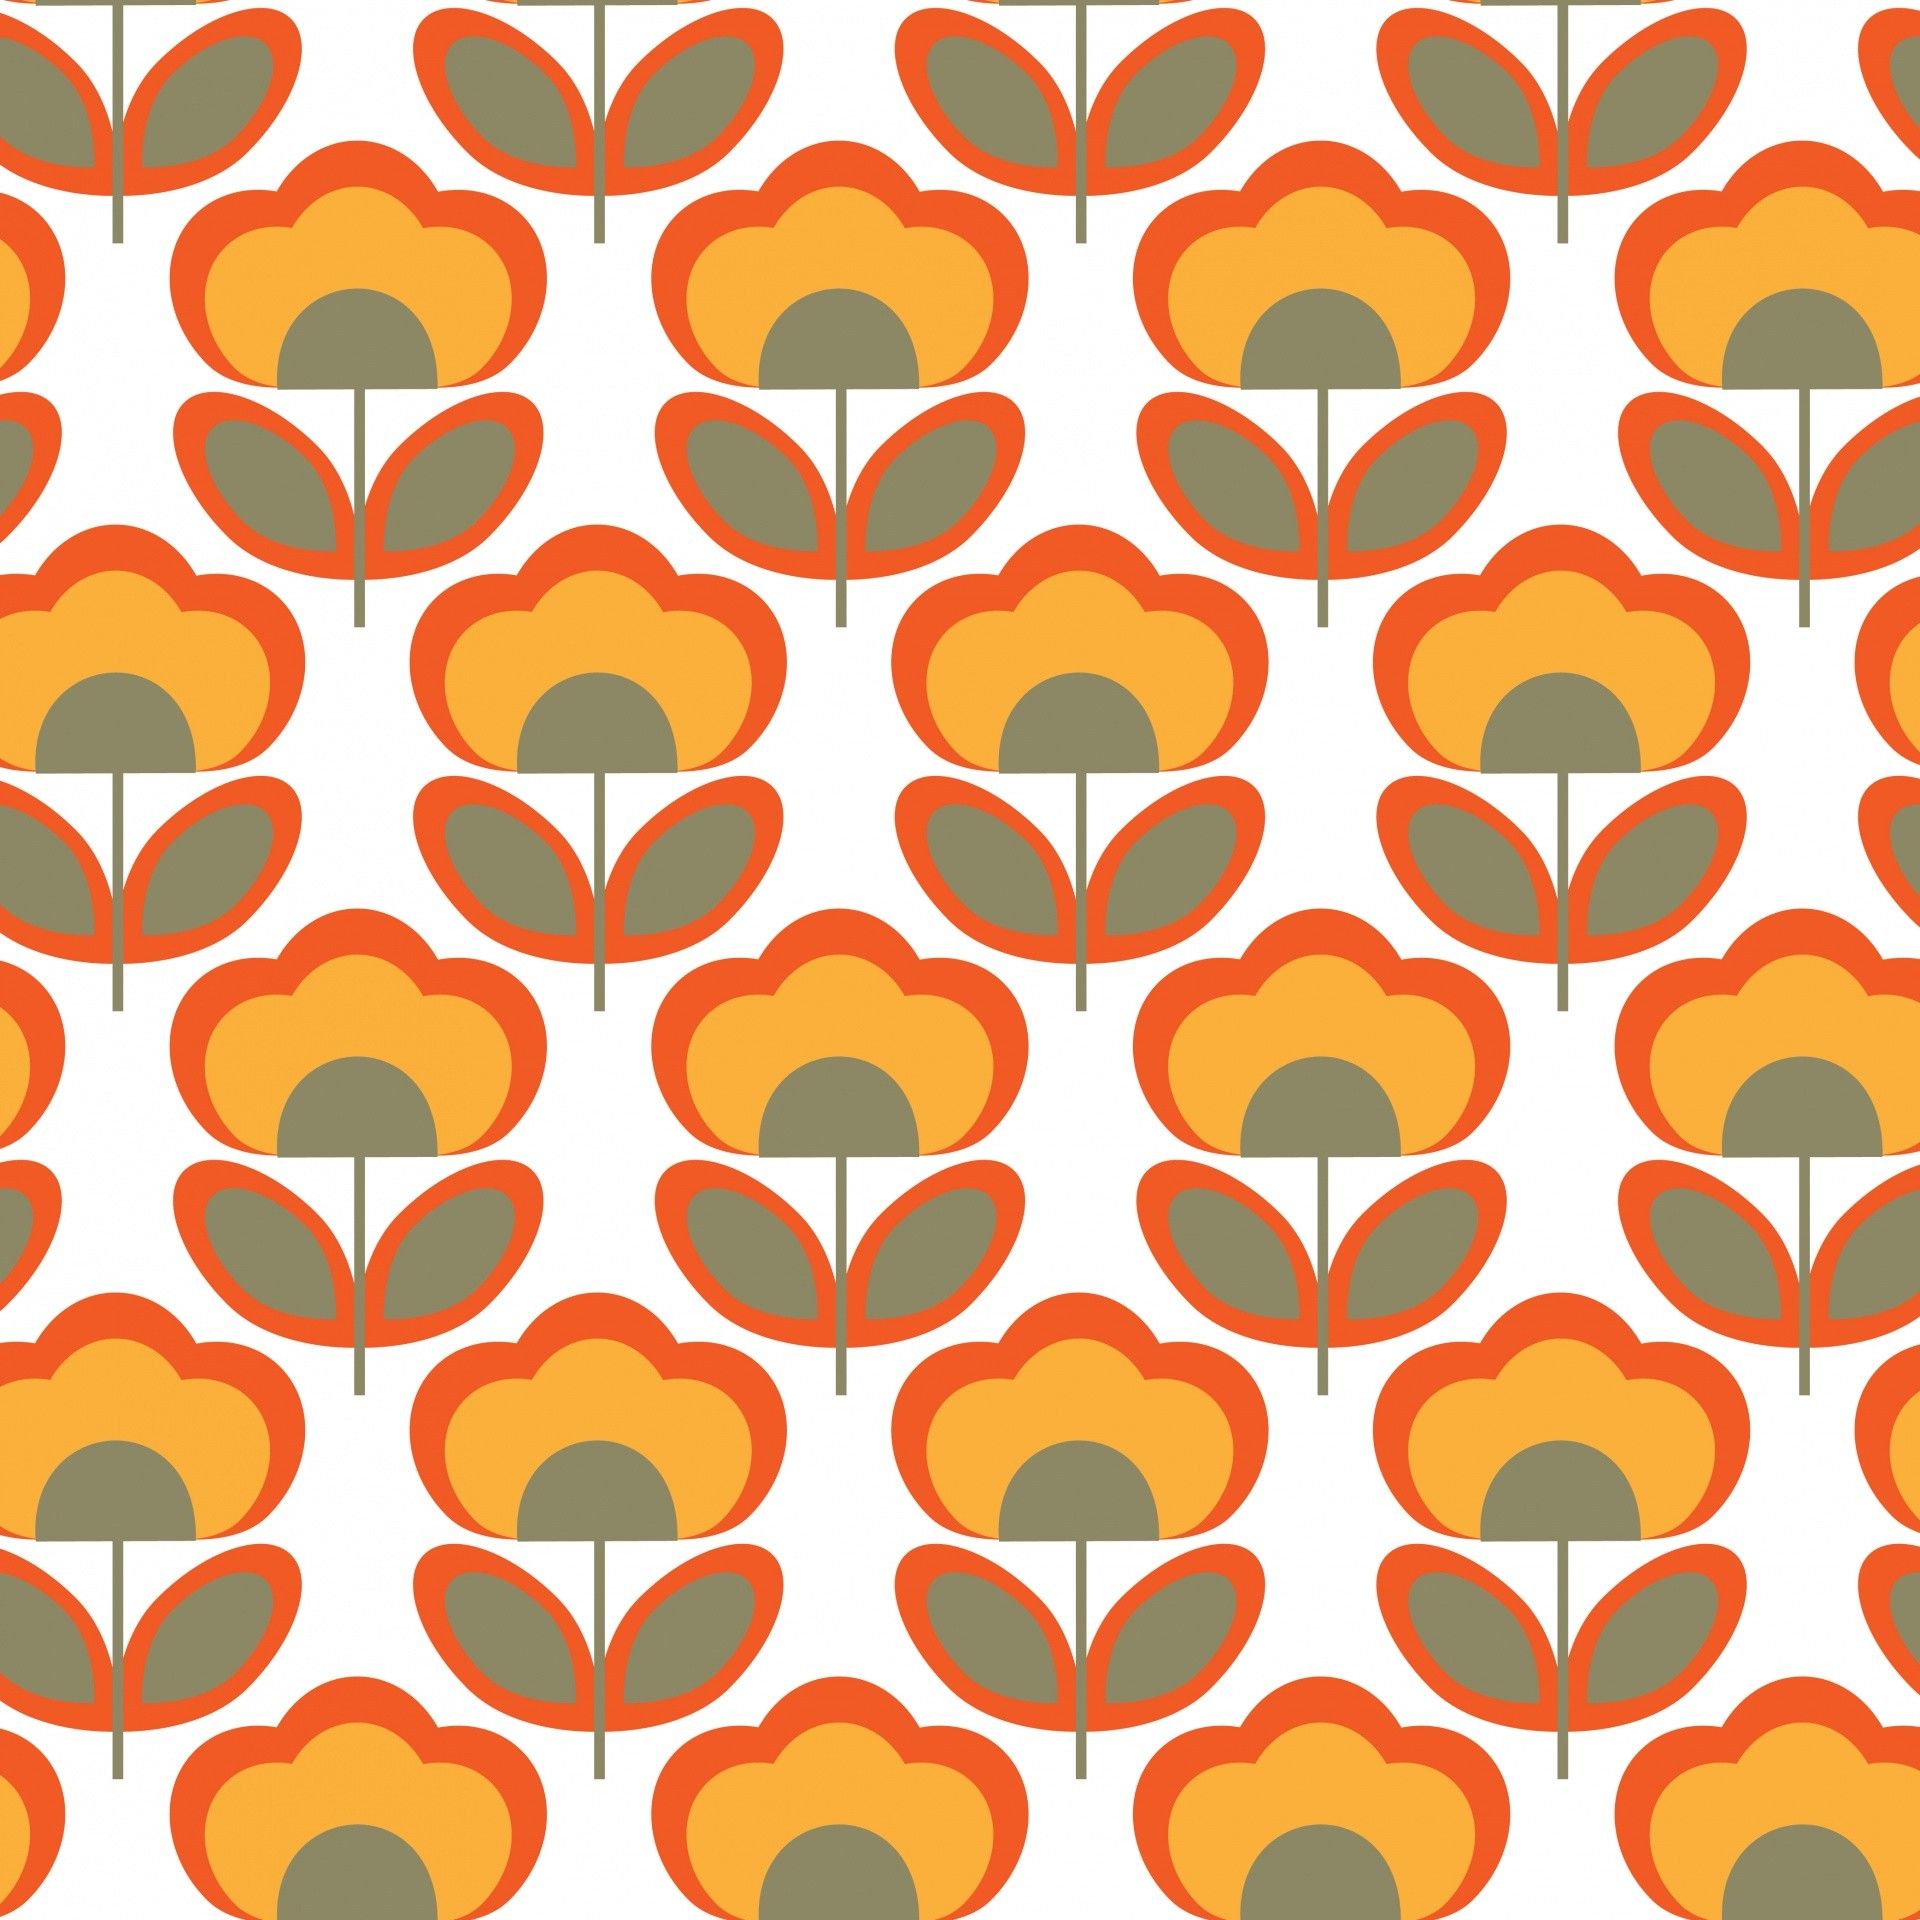 An orange and green floral pattern - 60s